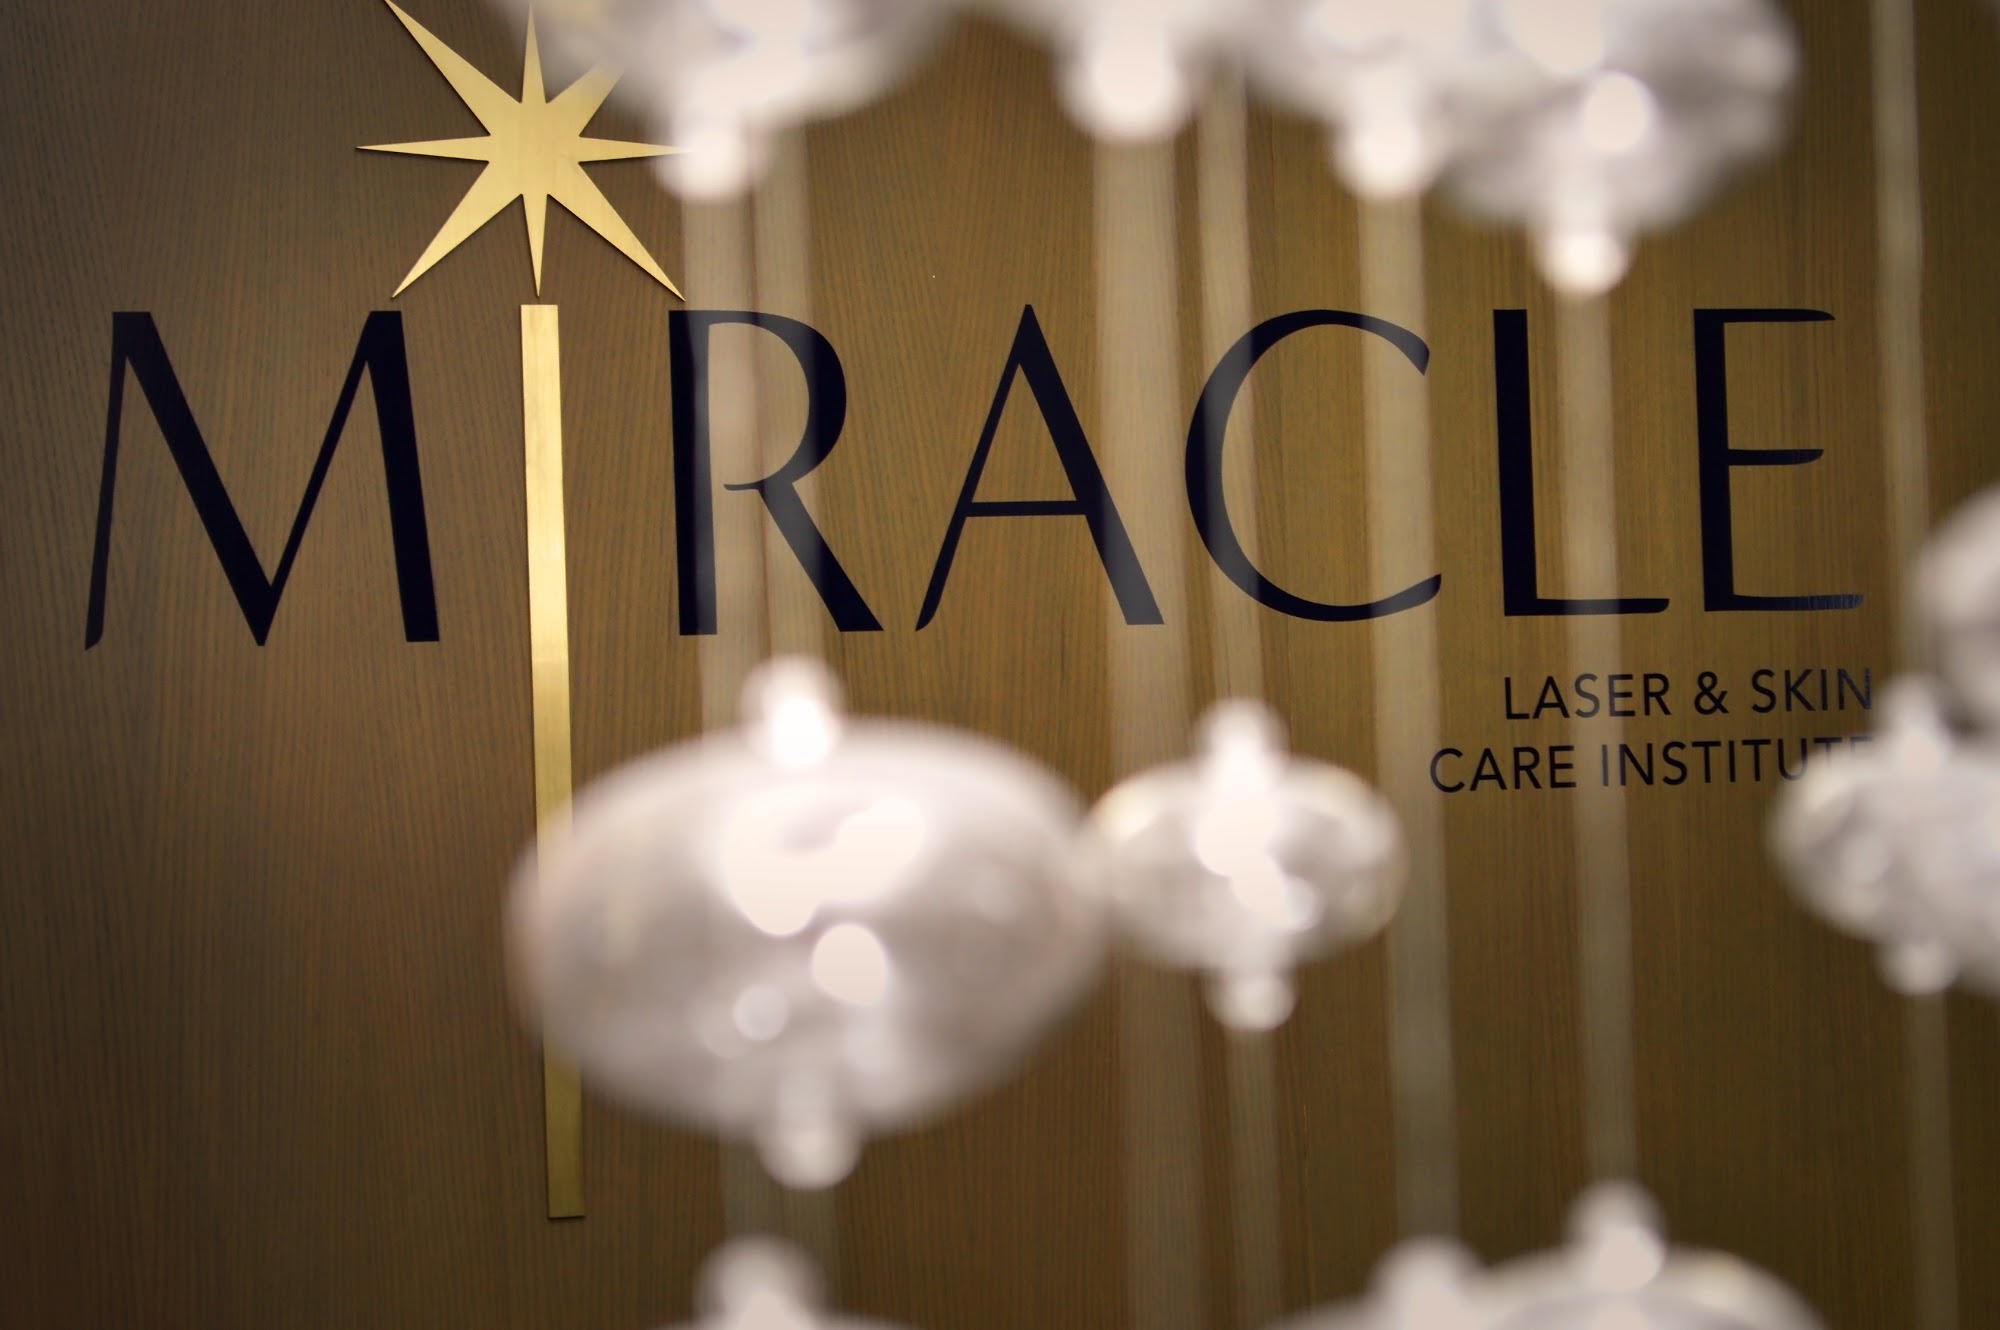 Miracle Laser & Skin Care Institute